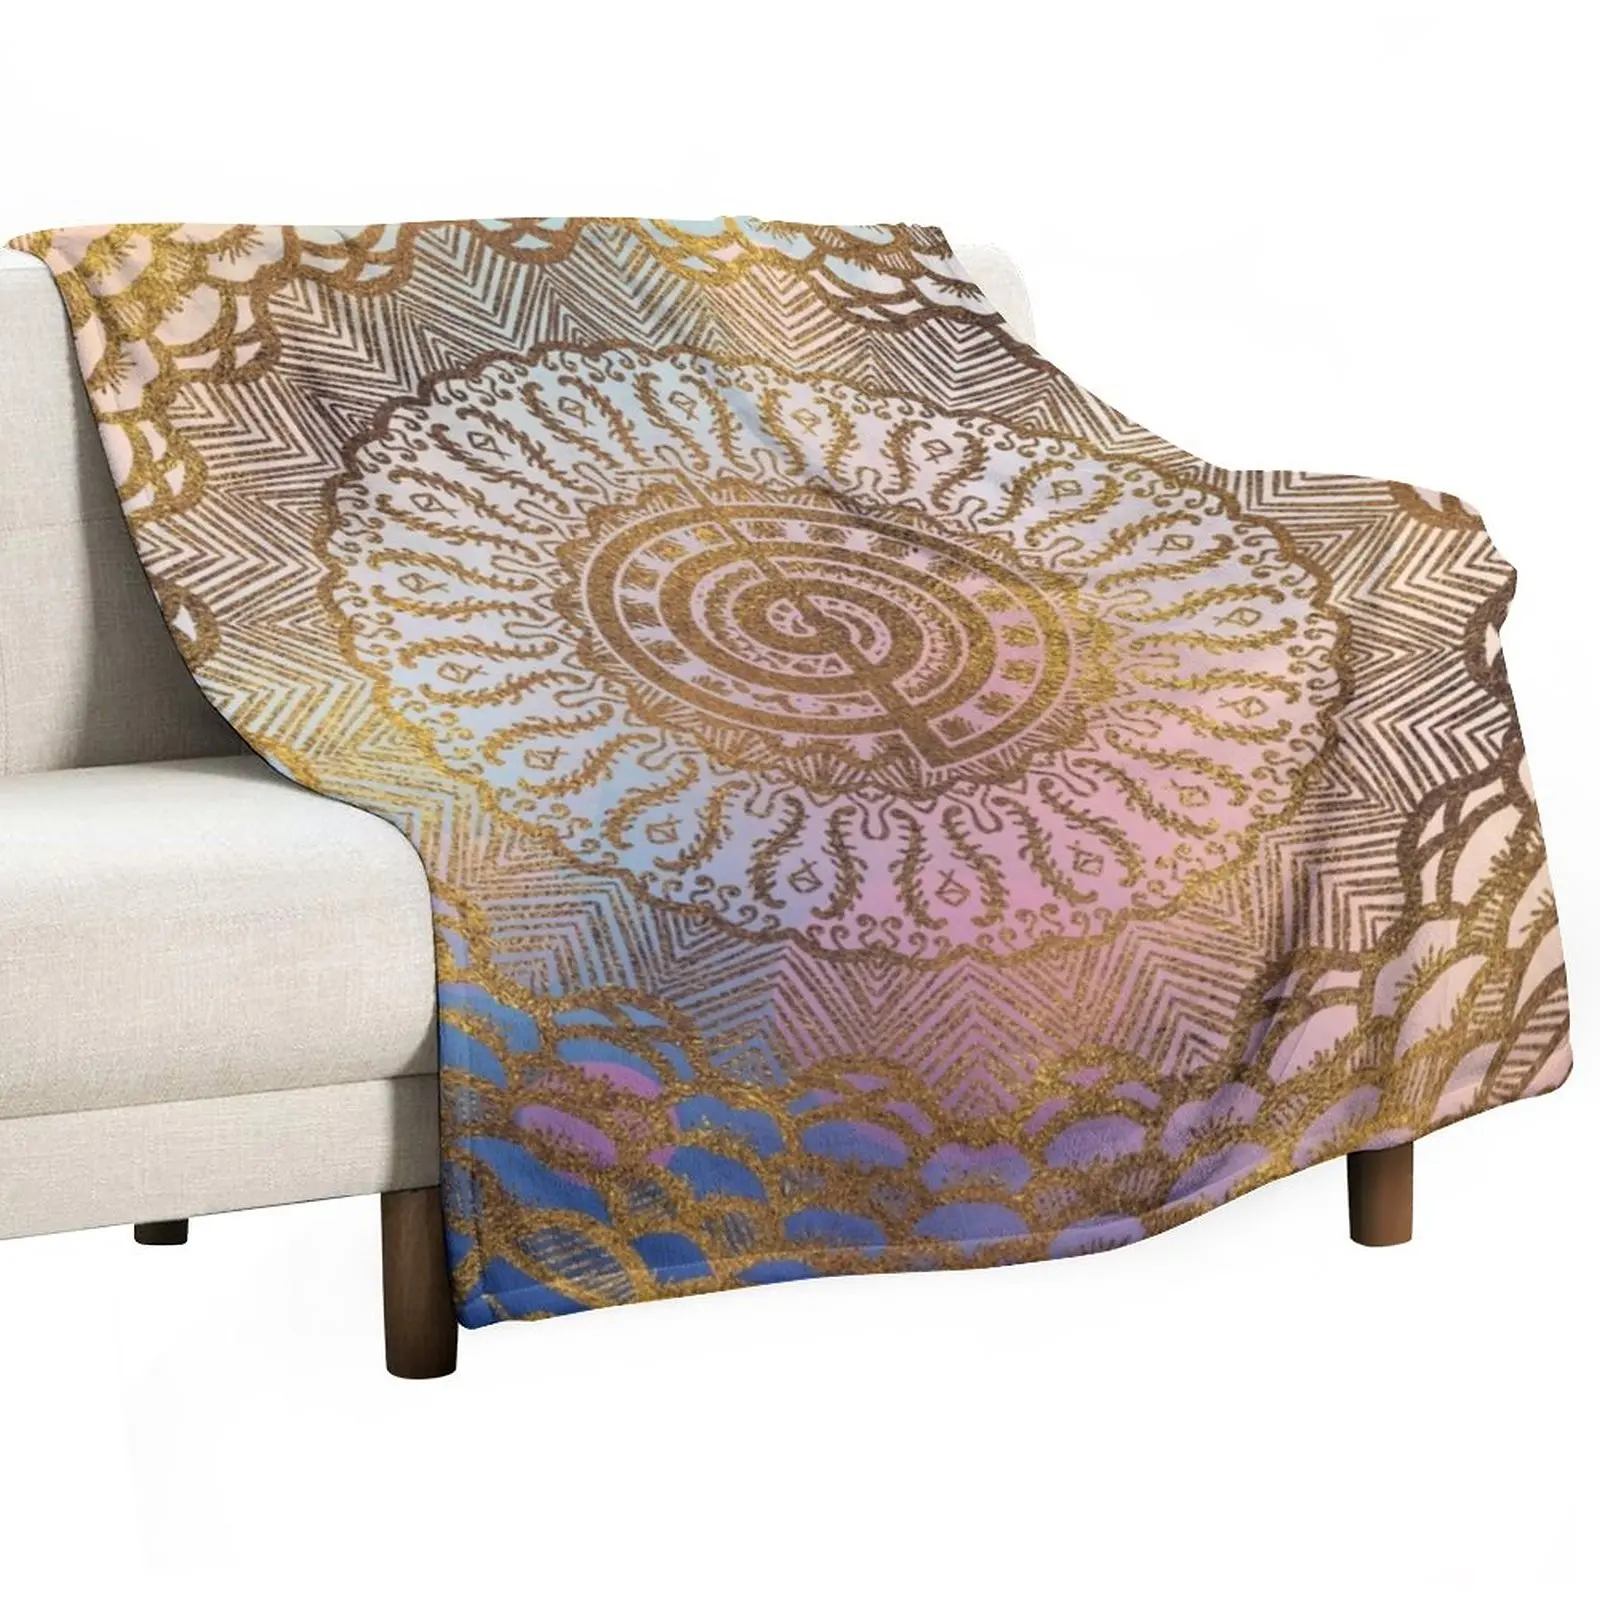 

Gentle Pastel and GoldChoku Rei Symbol in Mandala Throw Blanket blankets and throws Decorative Bed Blankets Soft Plaid